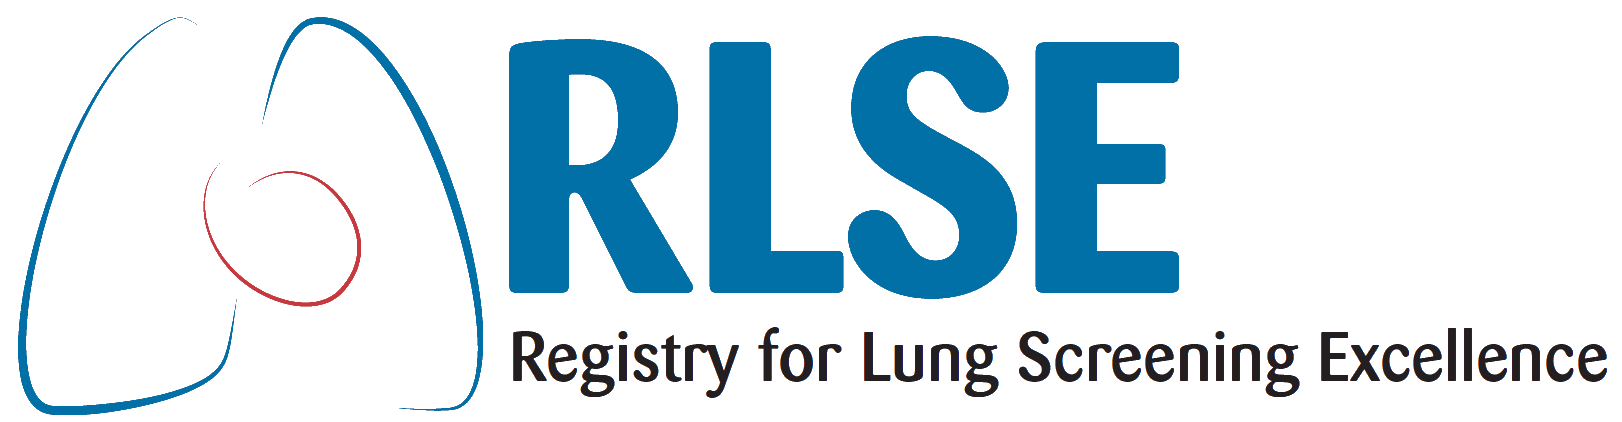 Registry for Lung Screening Excellence logo